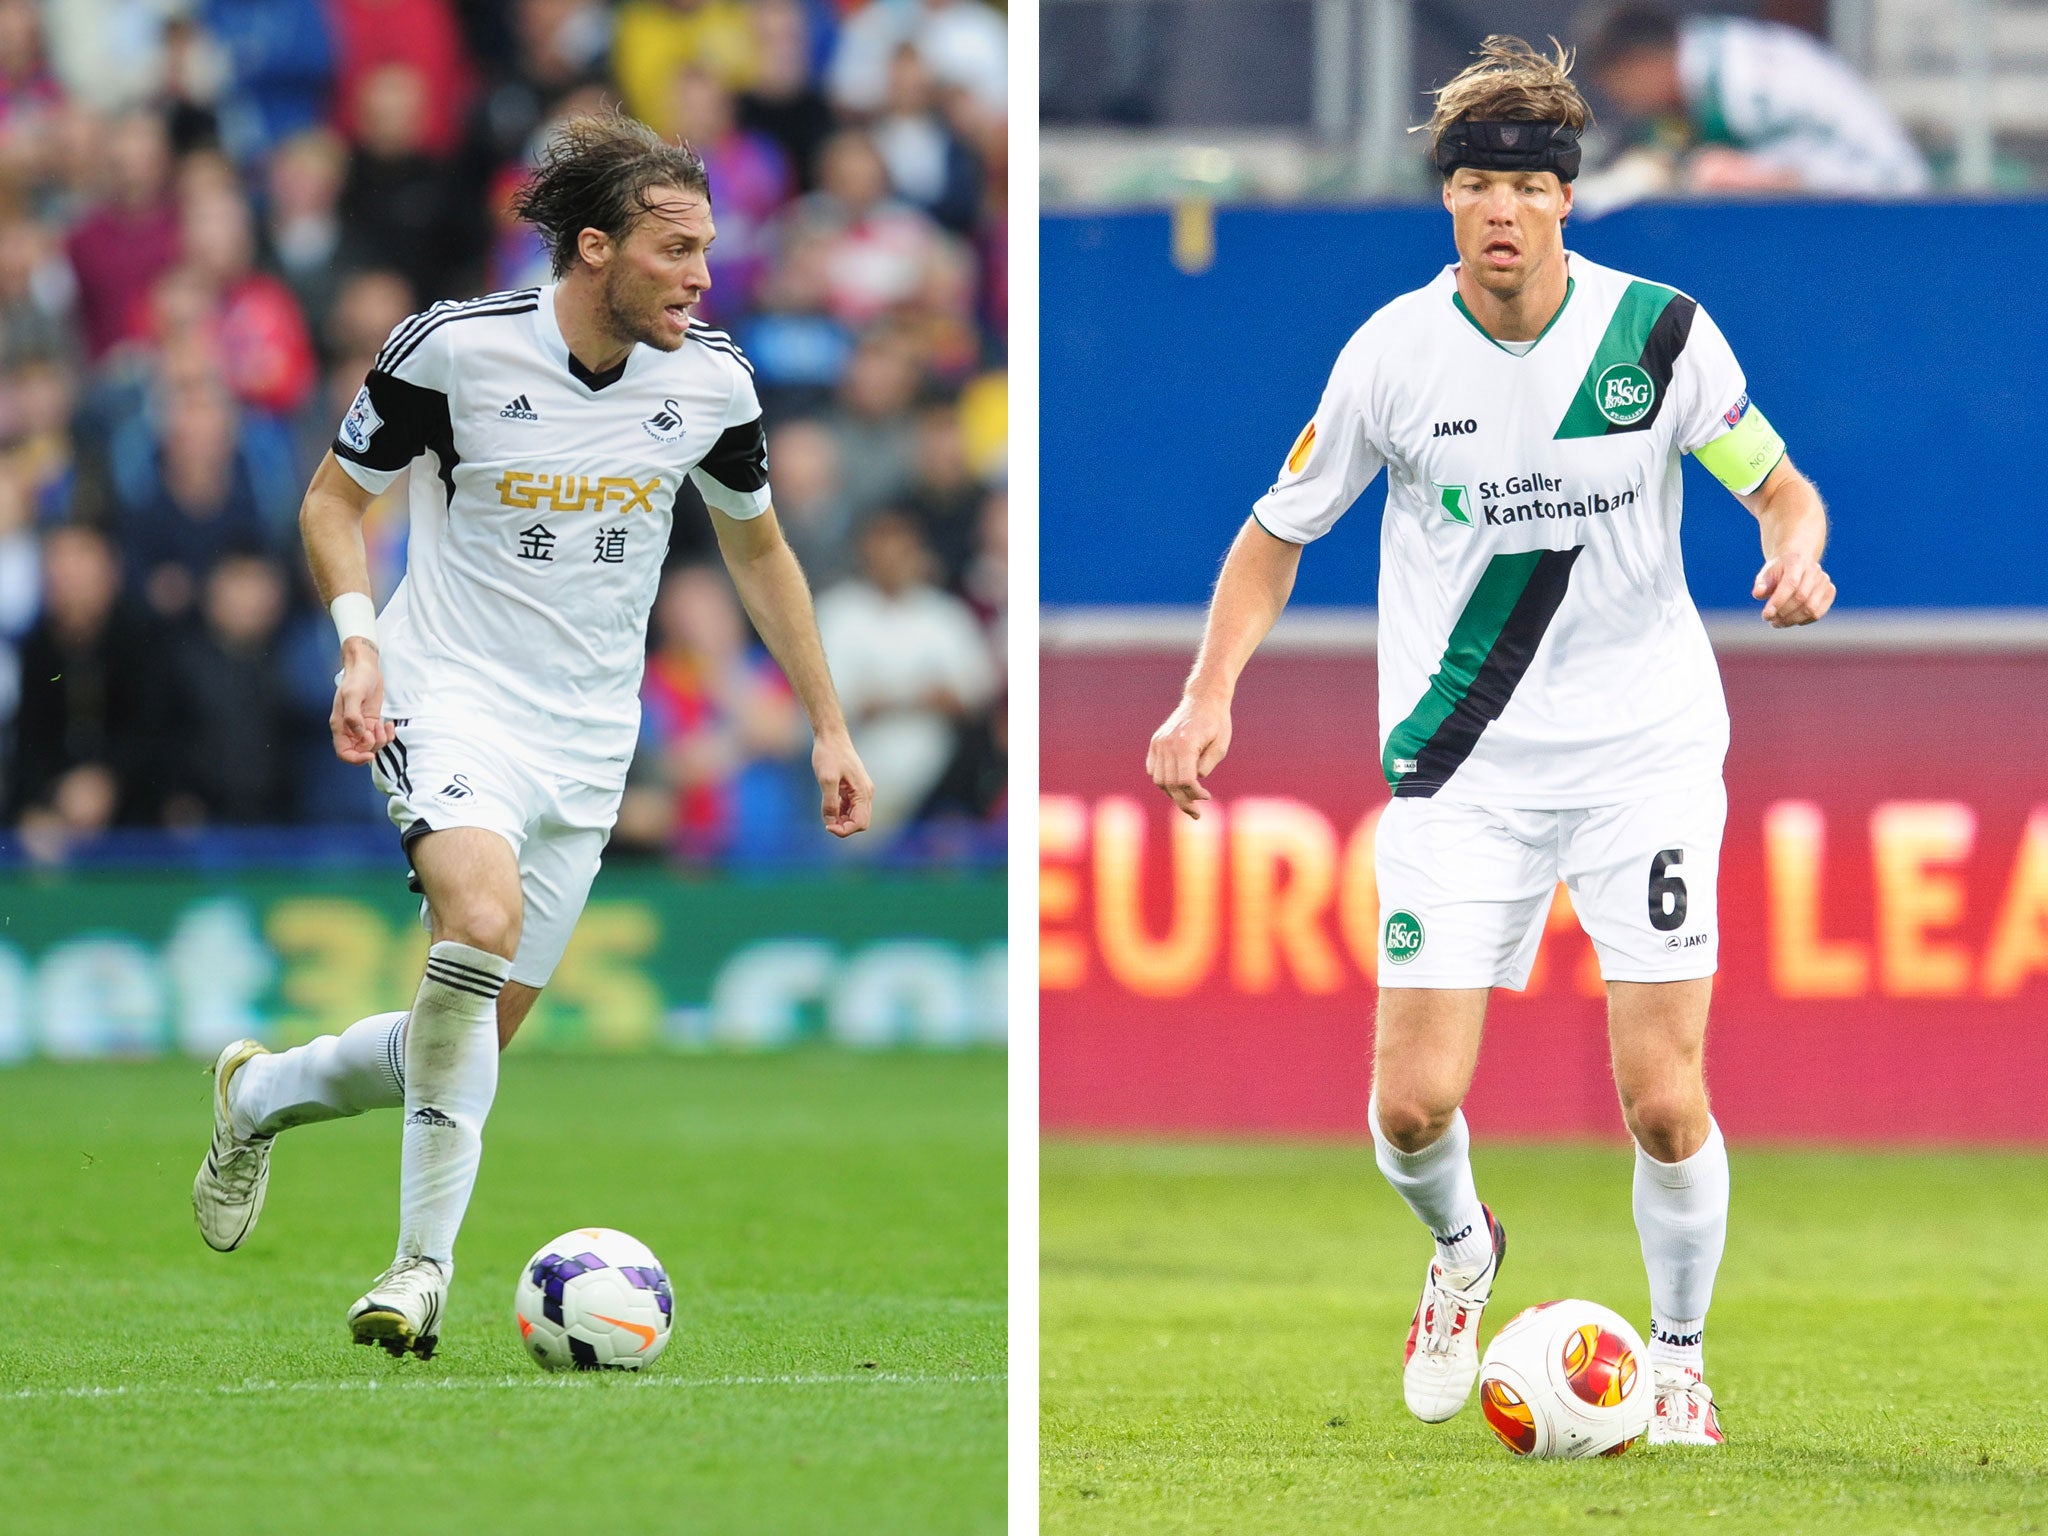 Michu of Swansea and Philippe Montandon of FC St Gallen